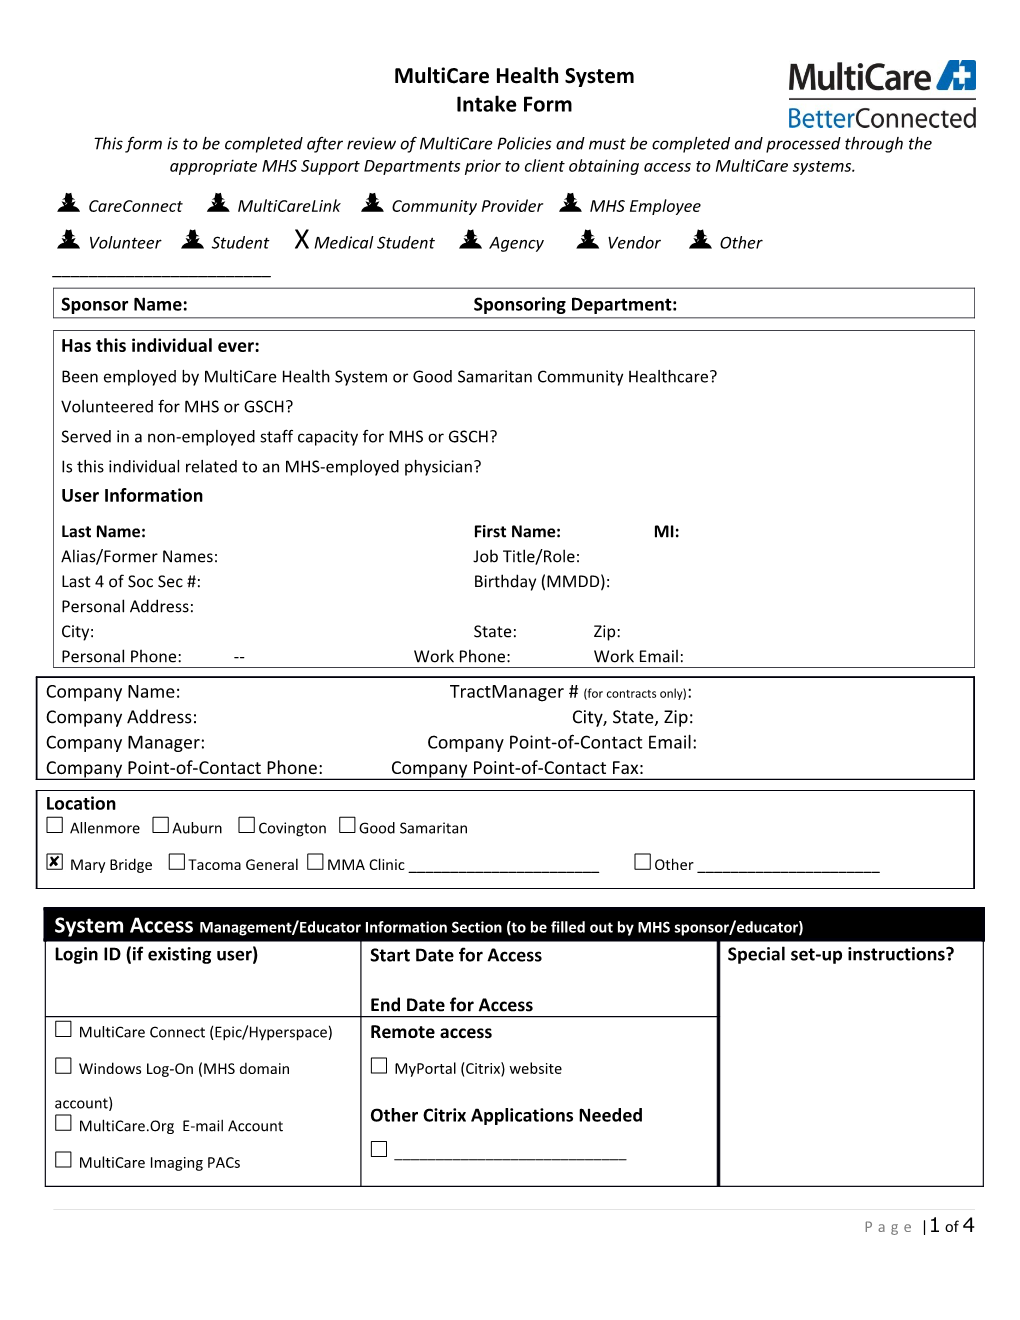 Intake and Attestation Forms - Type I